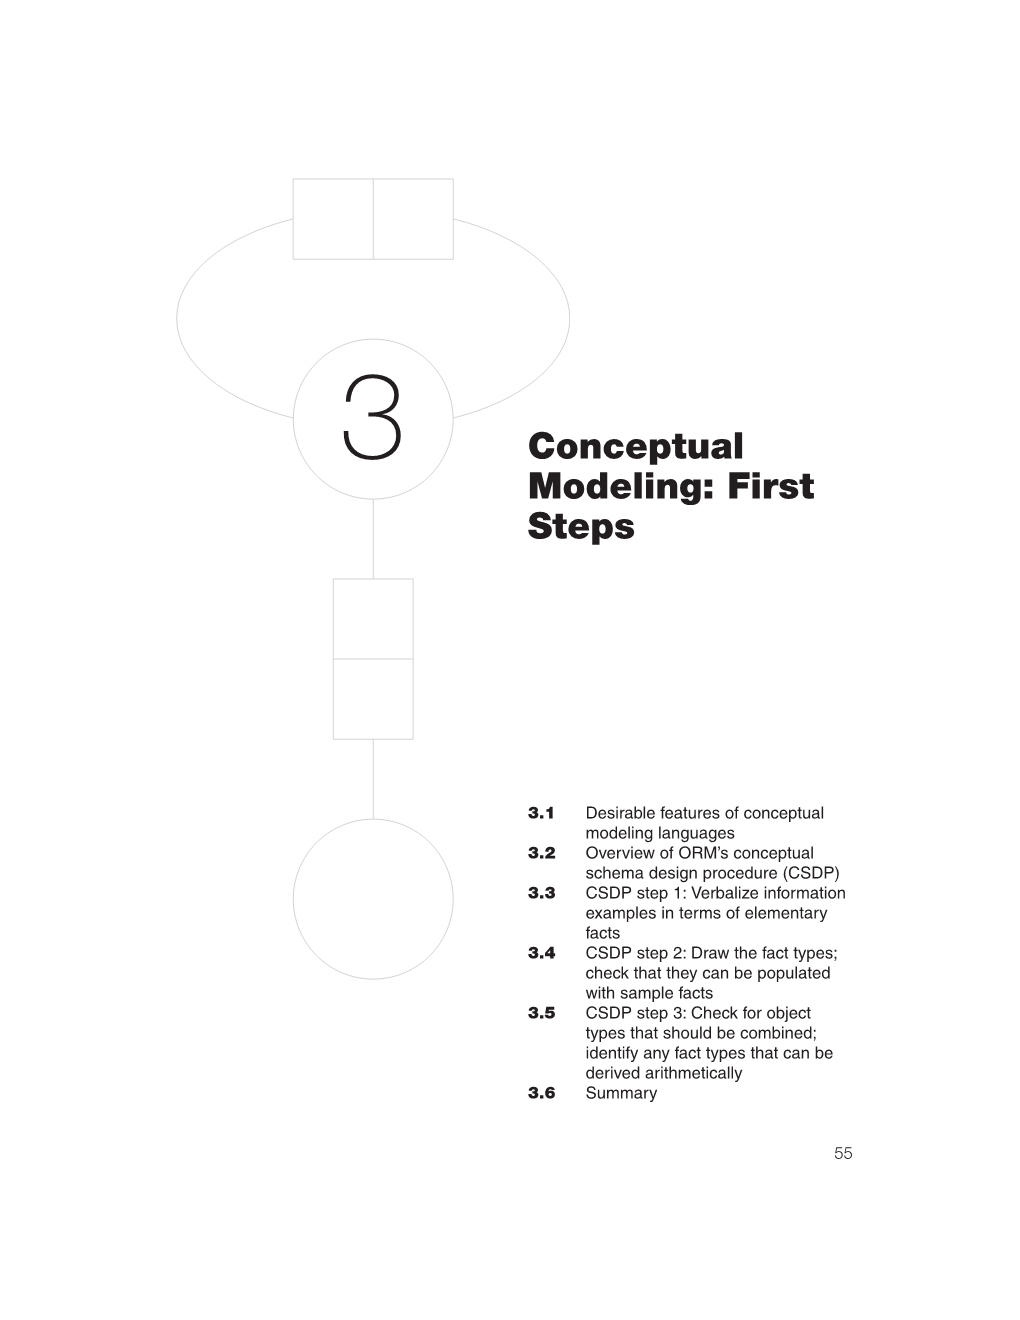 3 Conceptual Modeling: First Steps